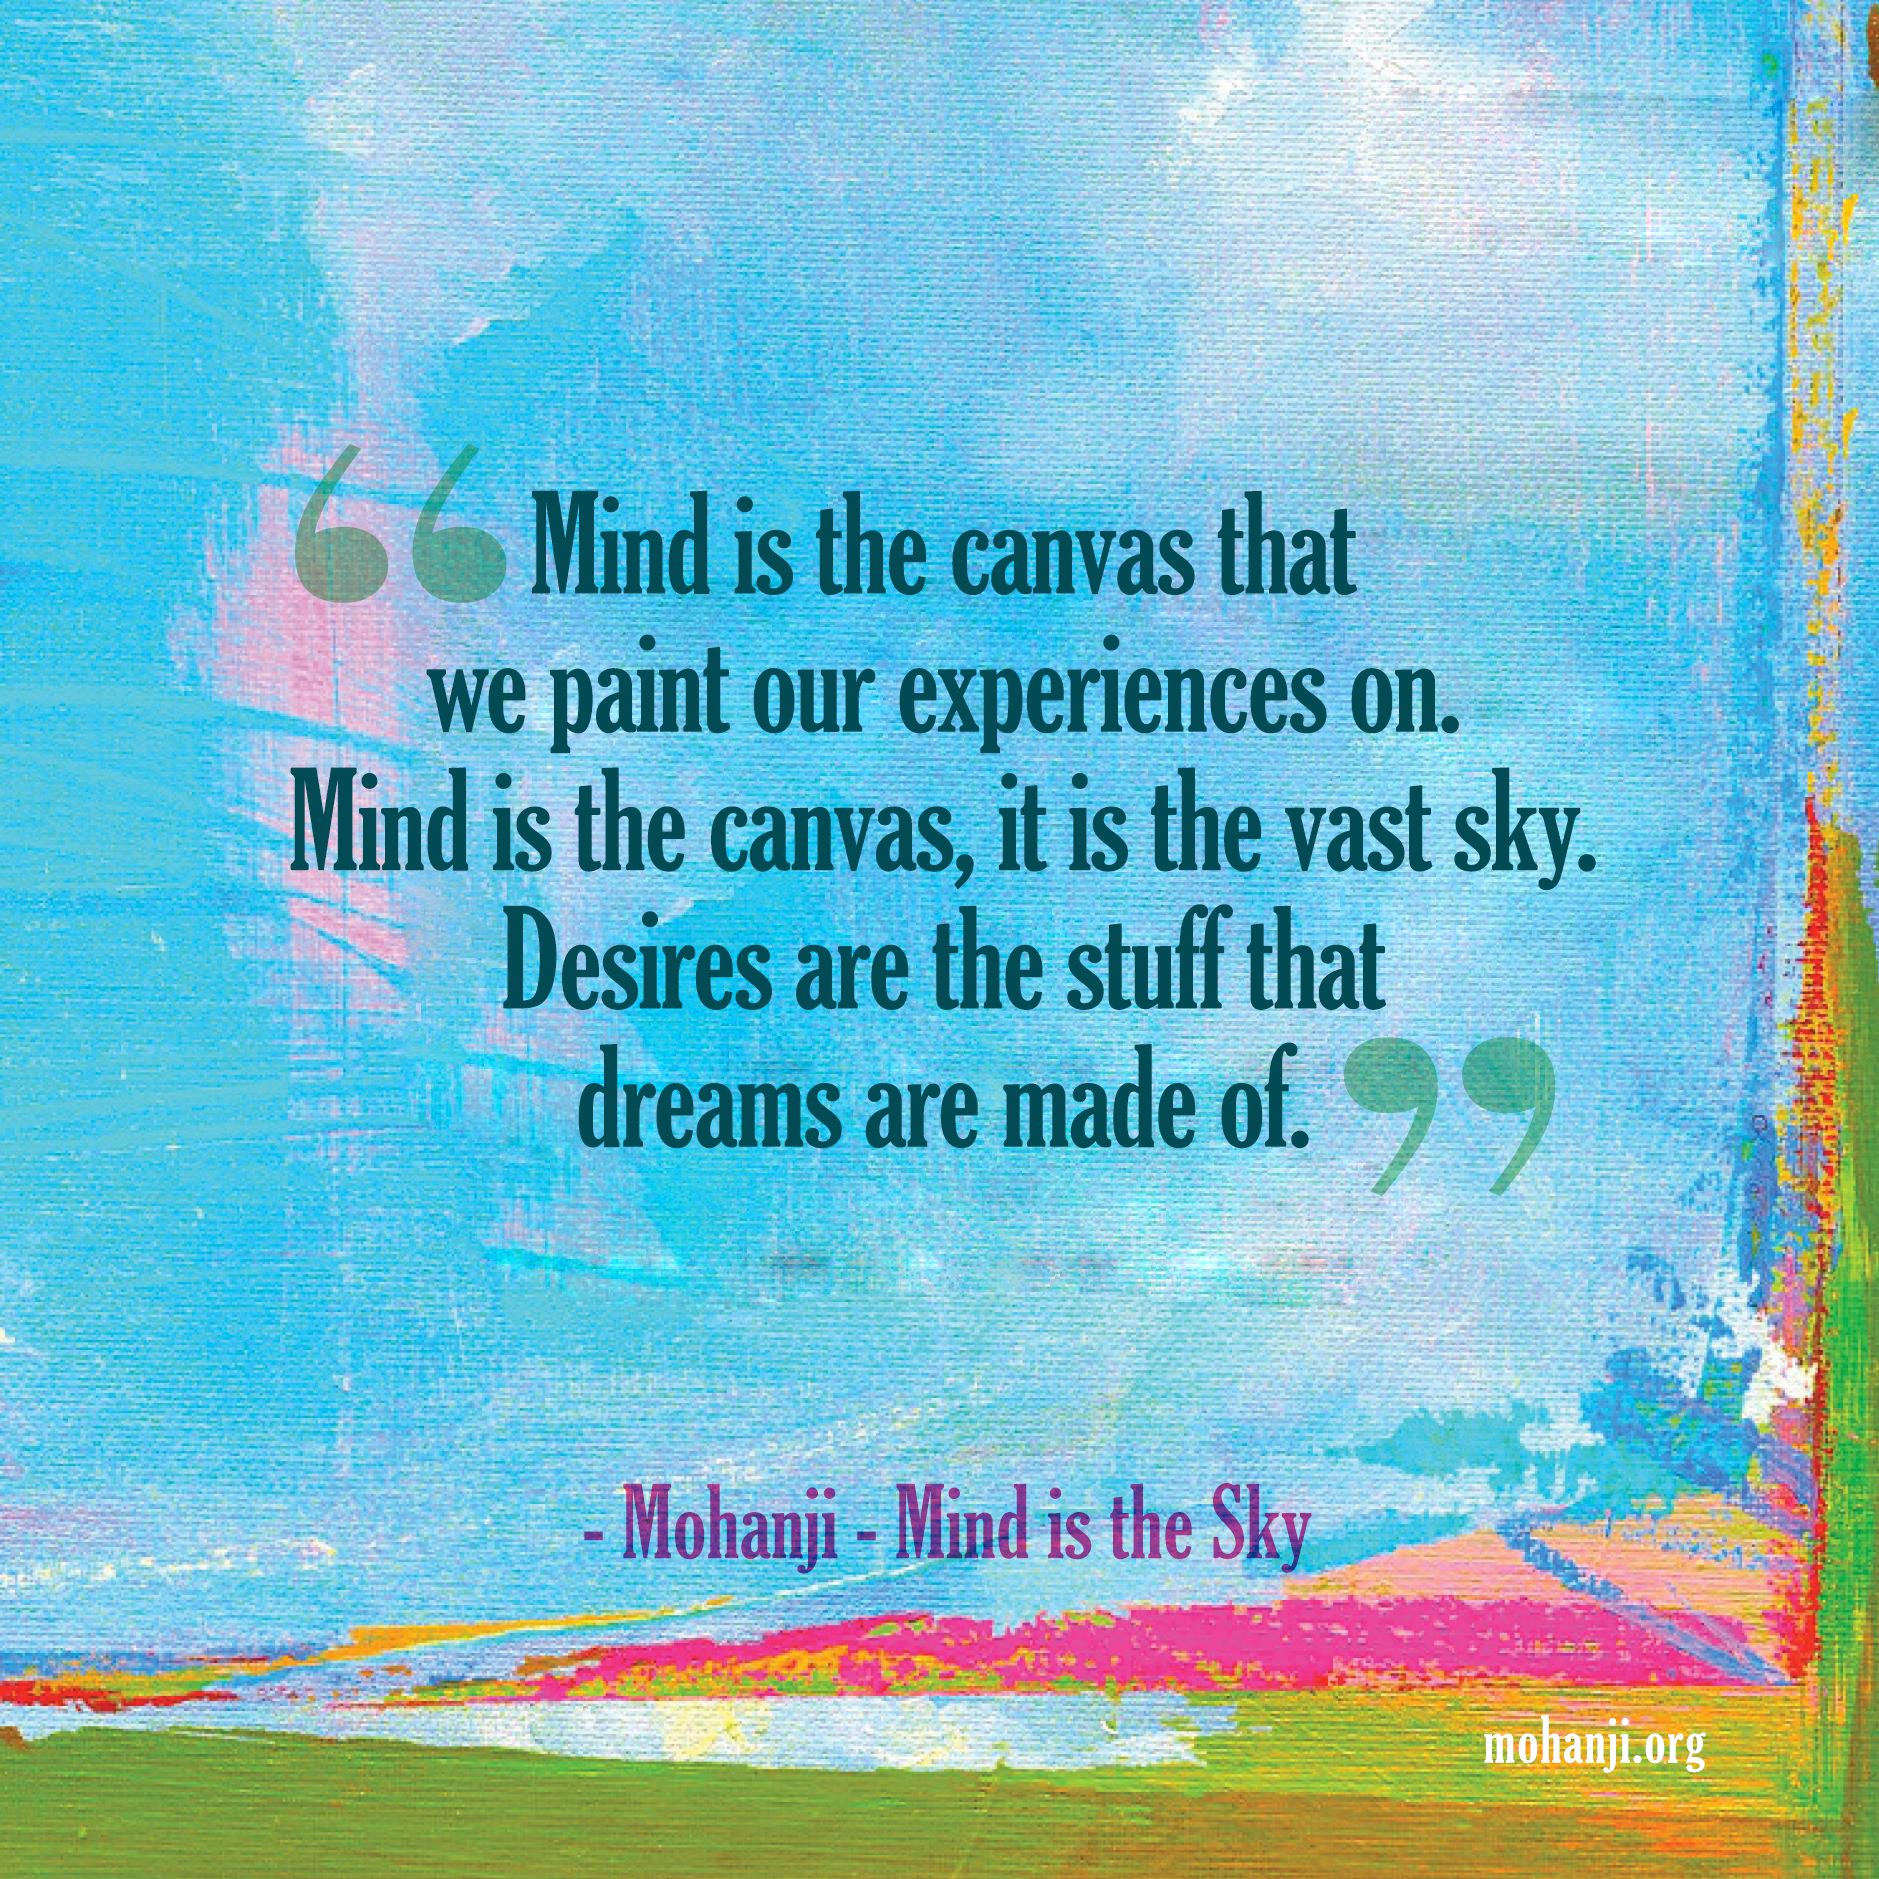 Mohanji quote - Mind is the sky